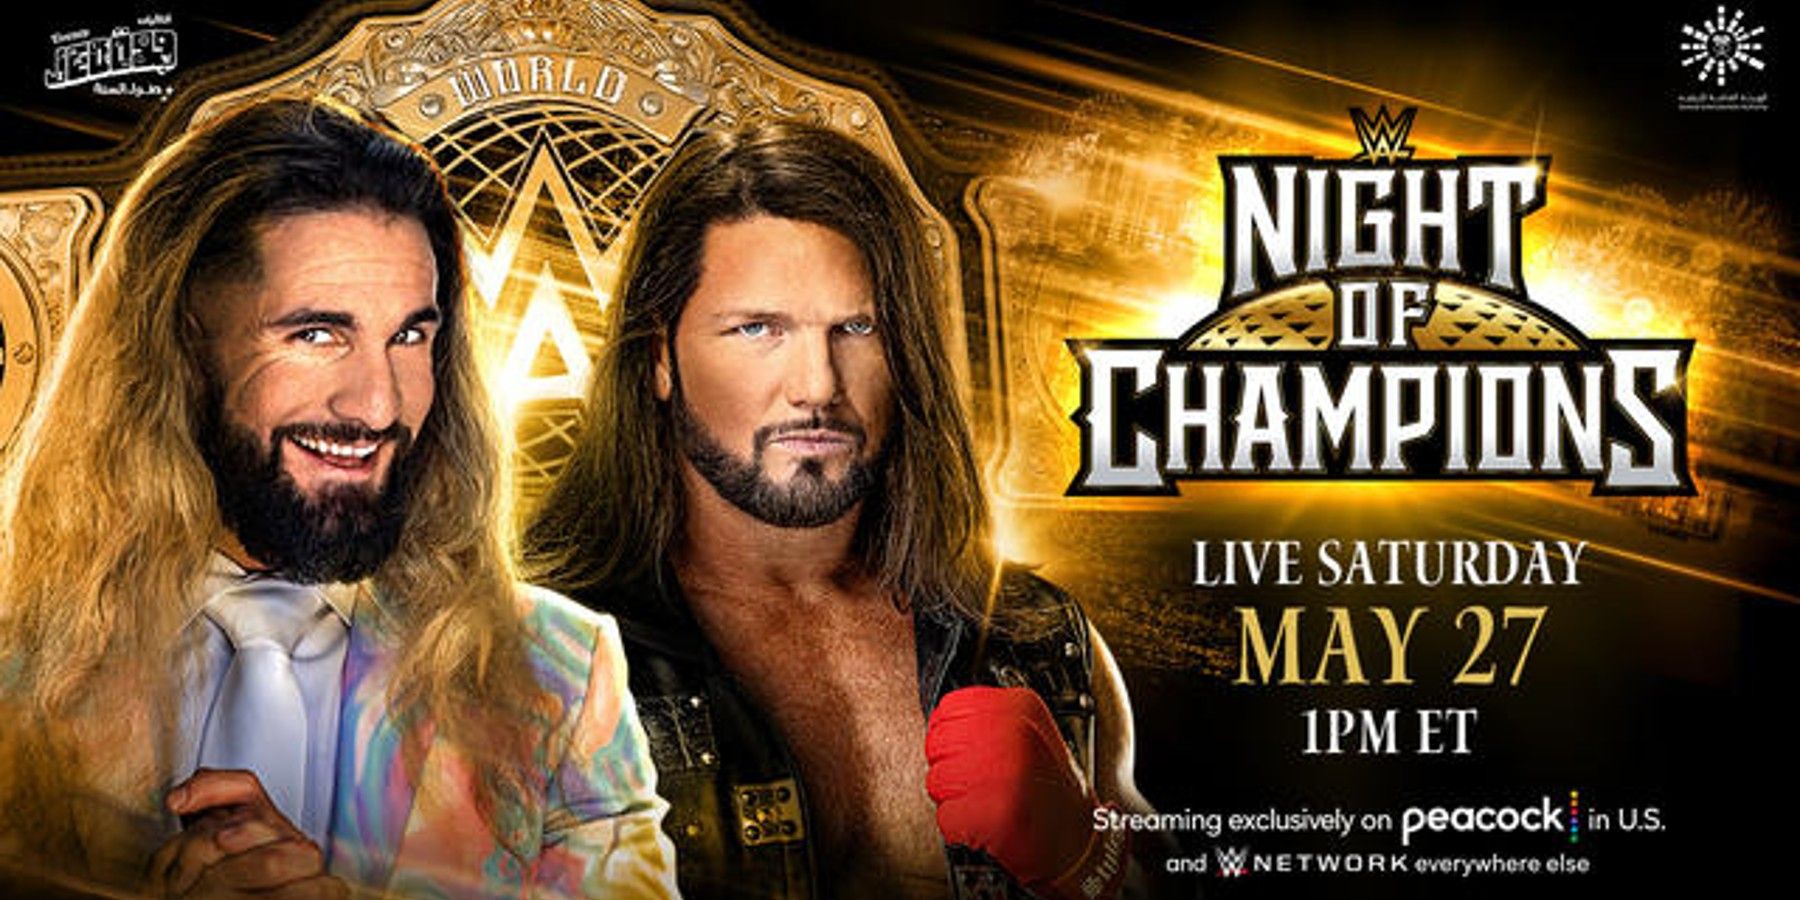 Seth “Freakin” Rollins and AJ Styles Night of Champions 2023 graphic for the inaugural World Heavyweight Championship